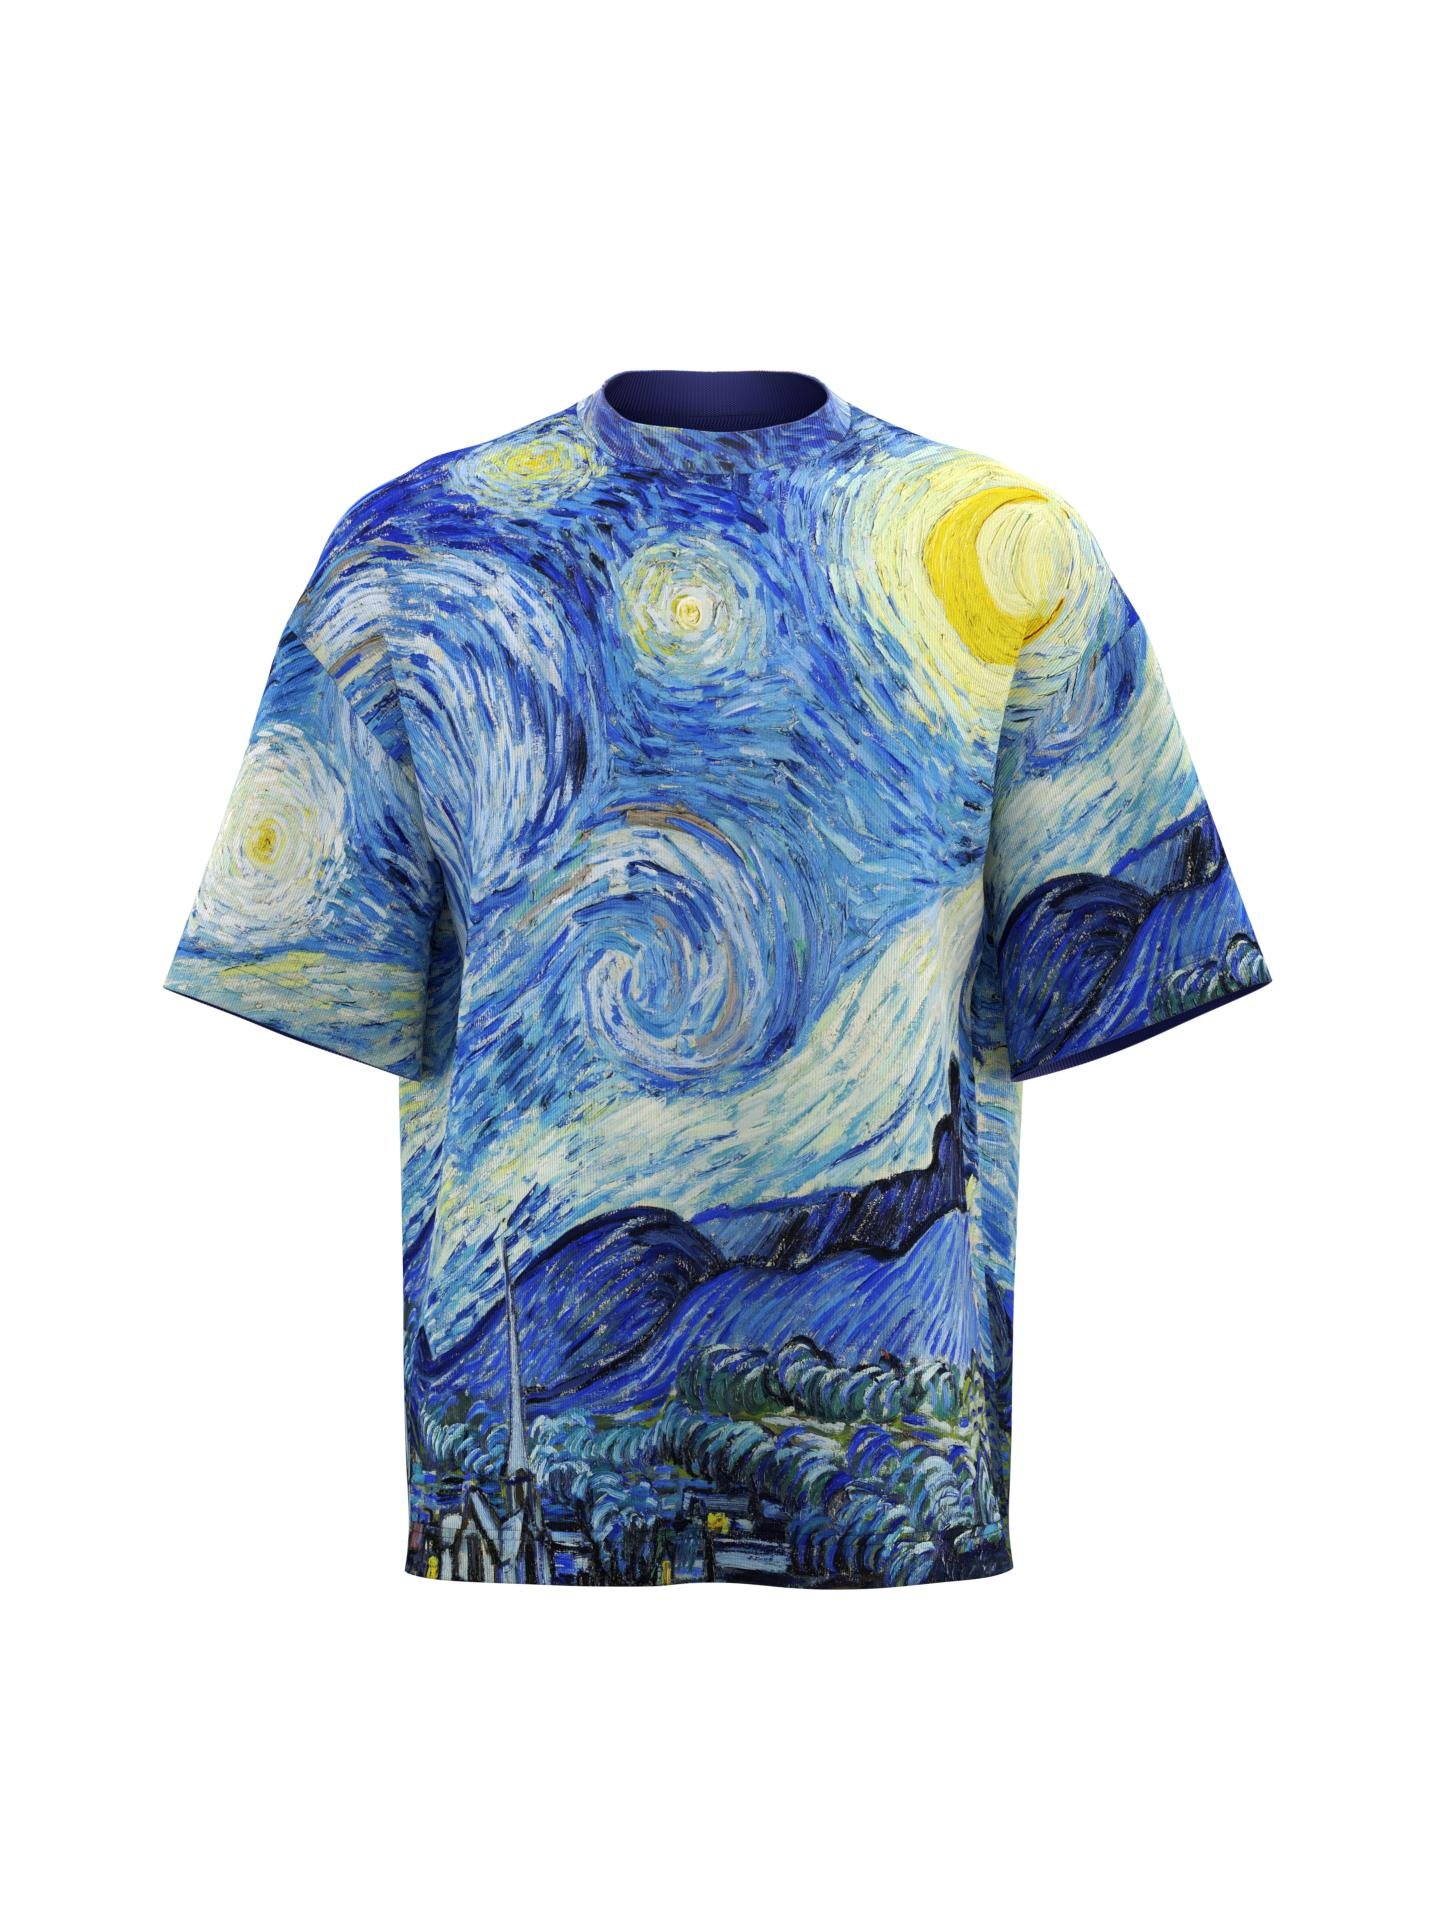 TSHIRT Oversize- The Starry Night by DRESSX